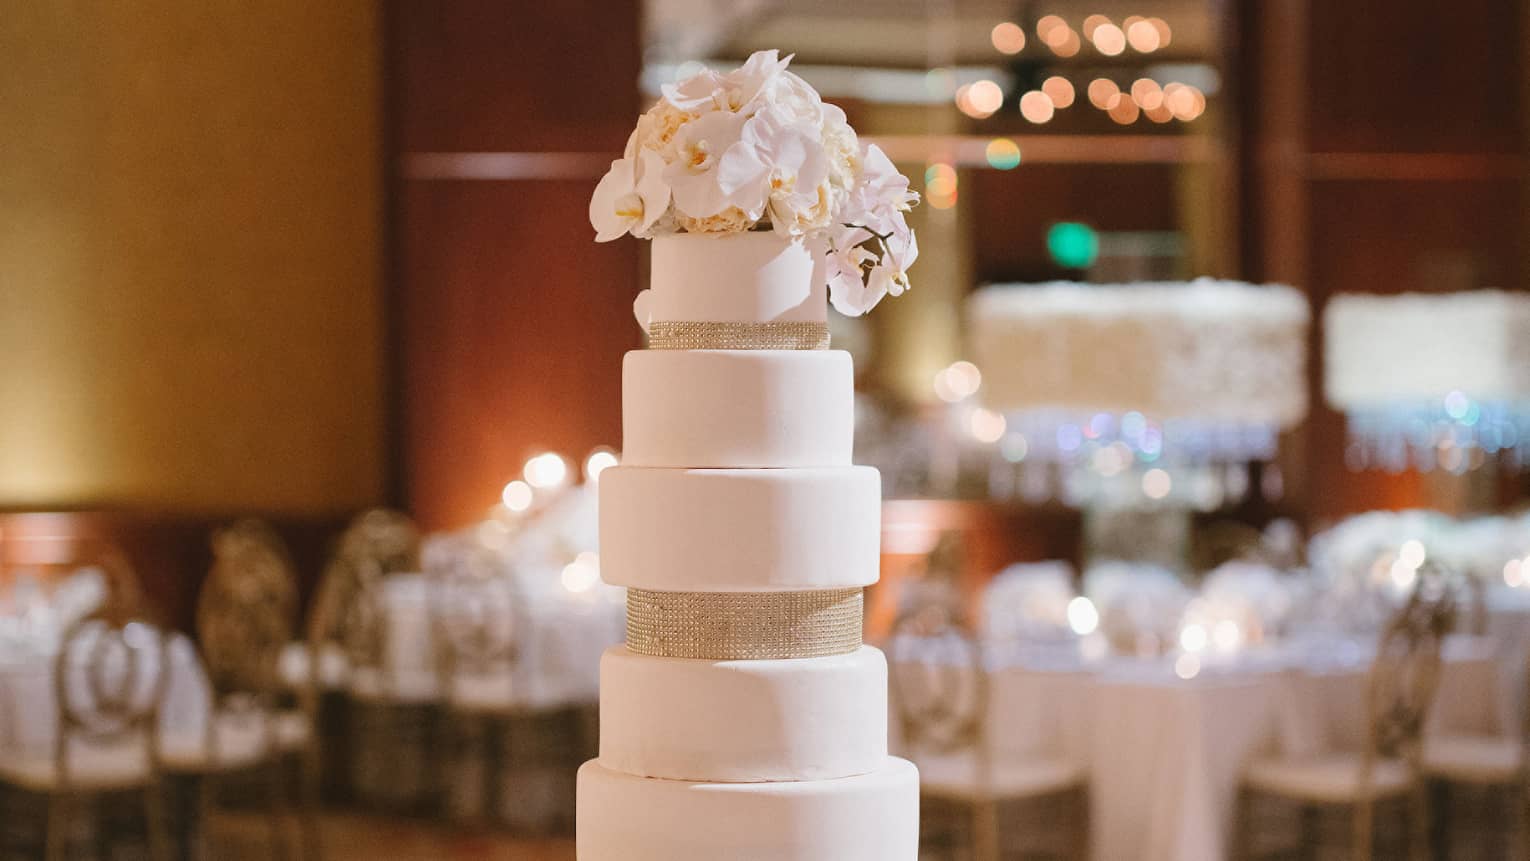 Tall tiered wedding cake decorated with white roses at top, base